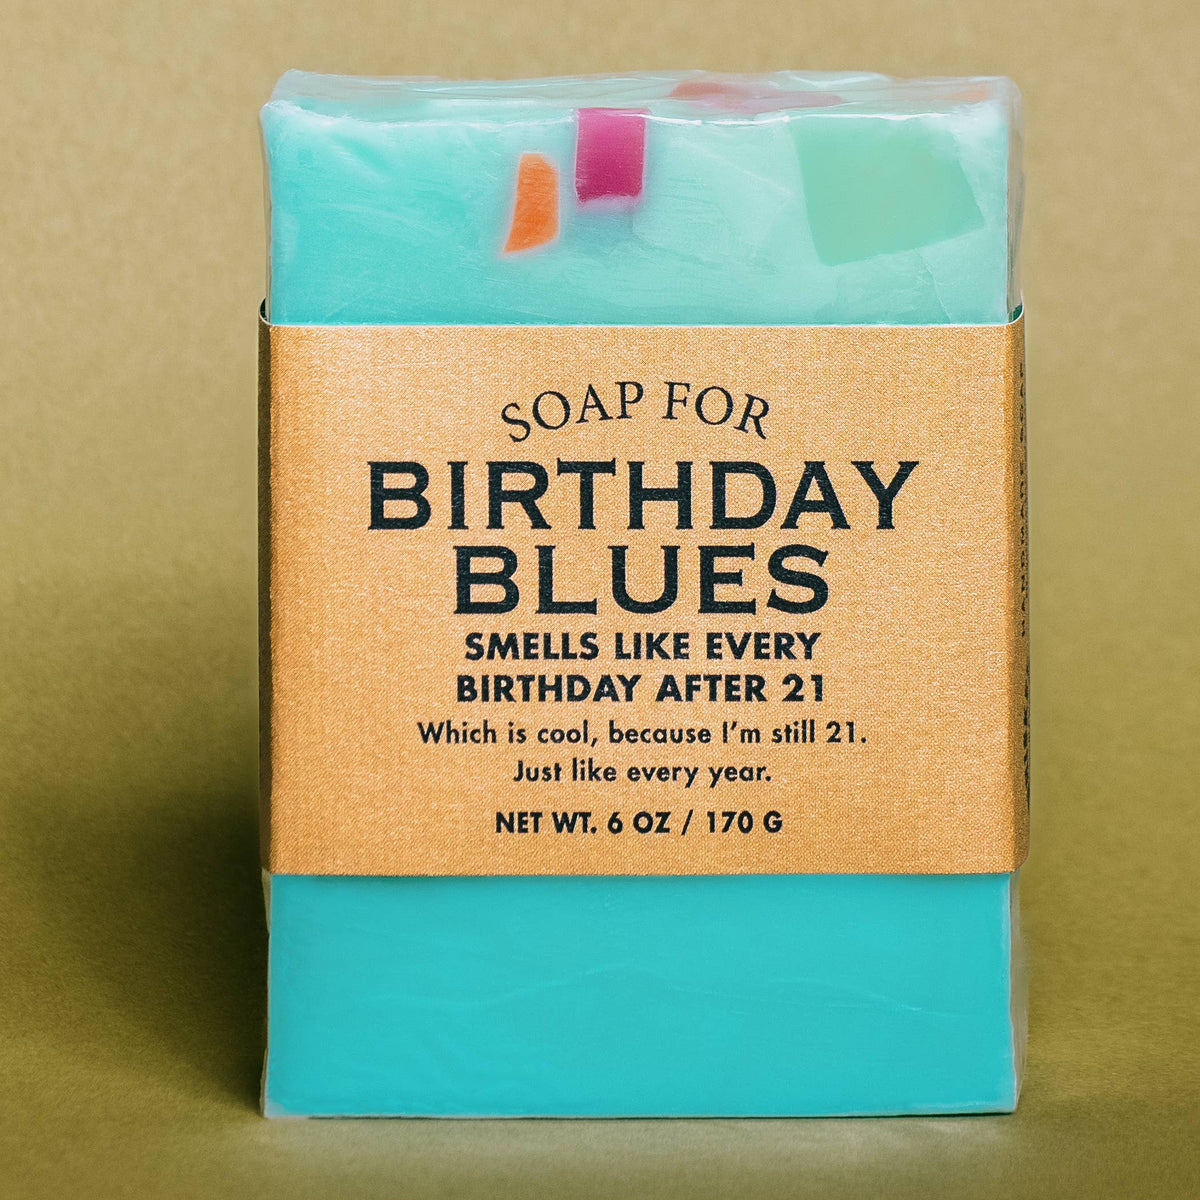 Whiskey River Soap Co. A Soap for Birthday Blues | Funny Soap